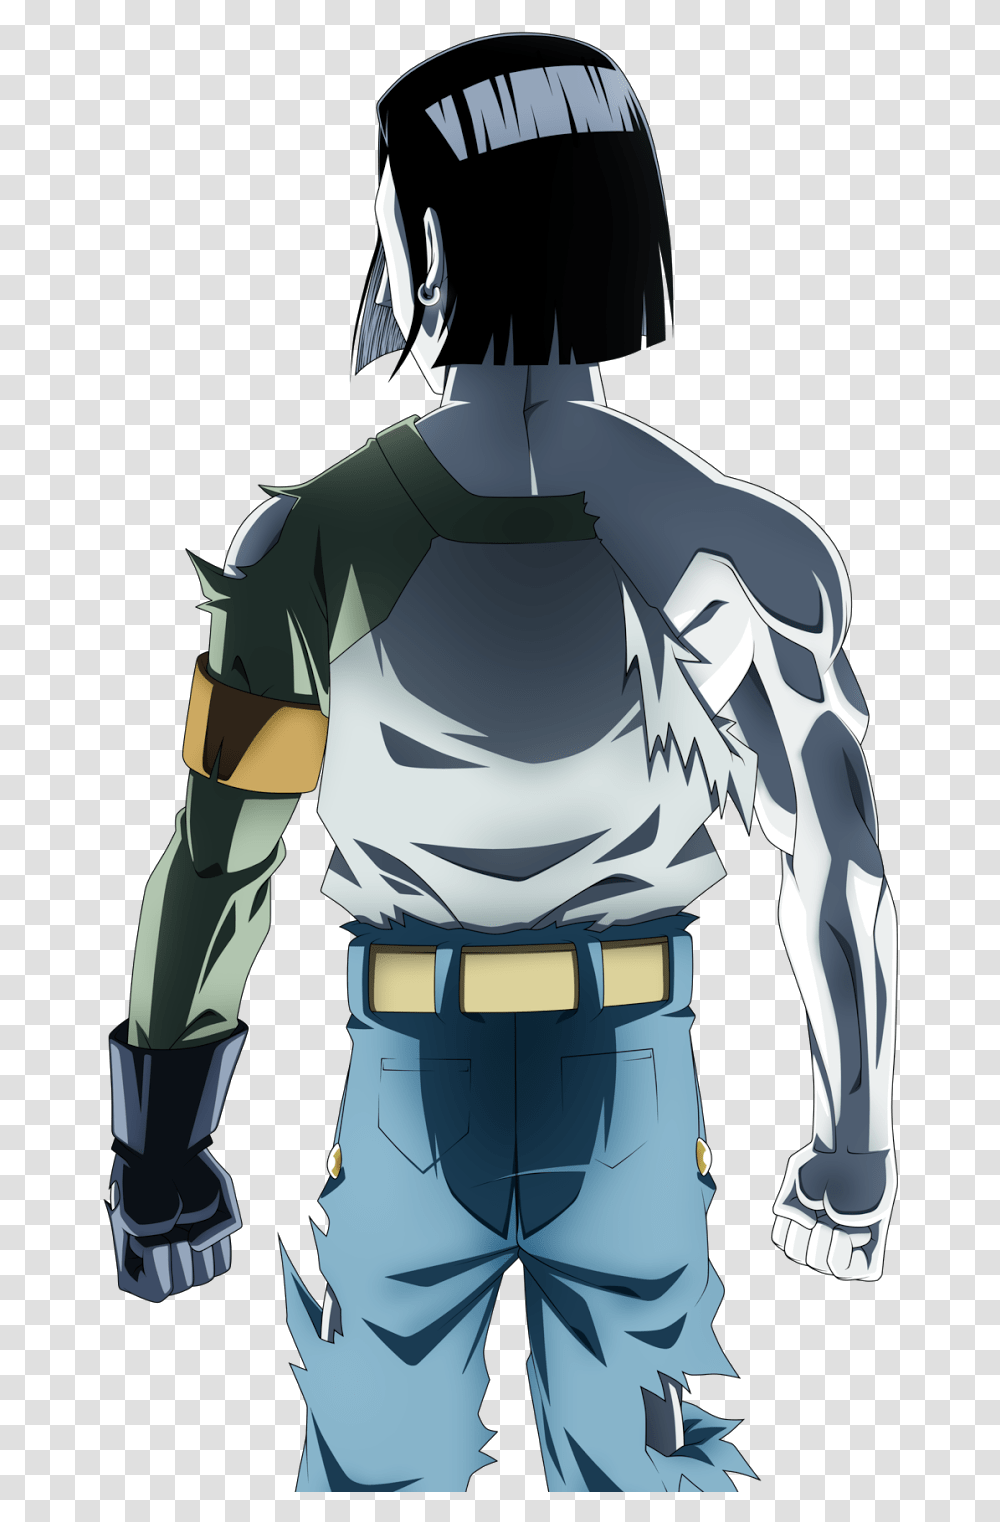 Download Android 17 Super Android 17 Image With No Android 17 Dragon Ball Super, Clothing, Sleeve, Buckle, Person Transparent Png